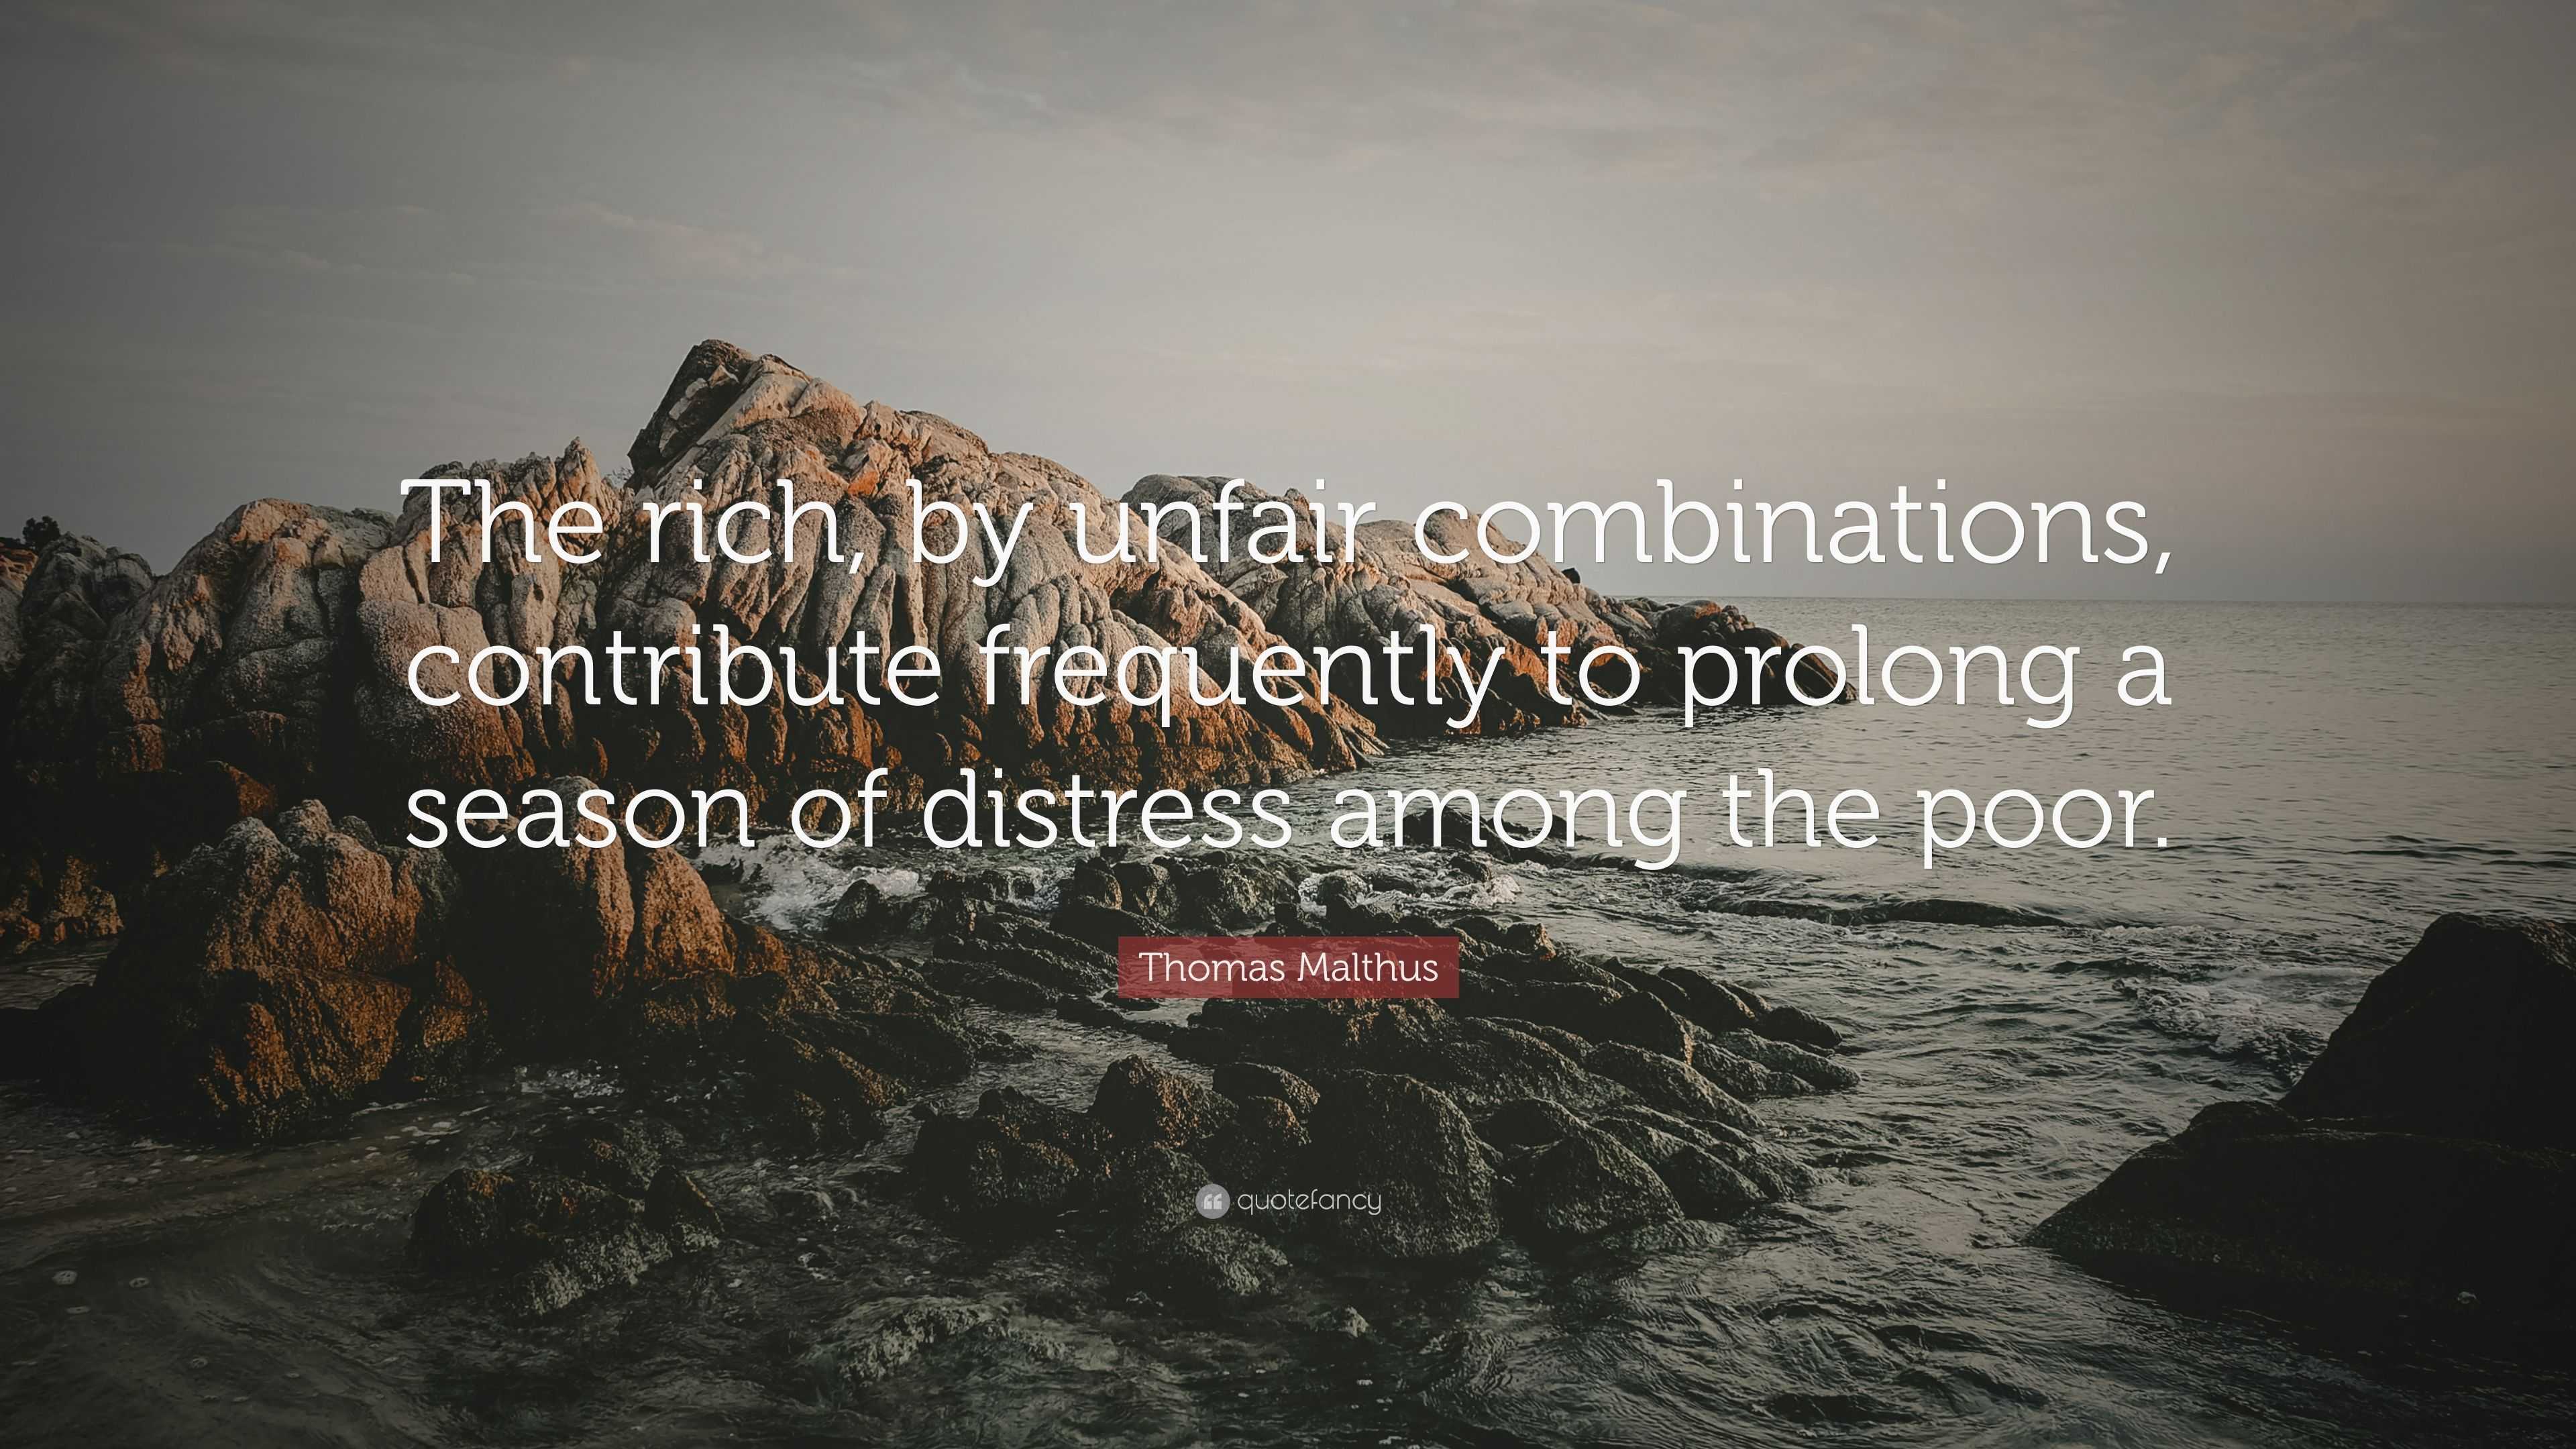 Thomas Malthus Quote: “The rich, by unfair combinations, contribute